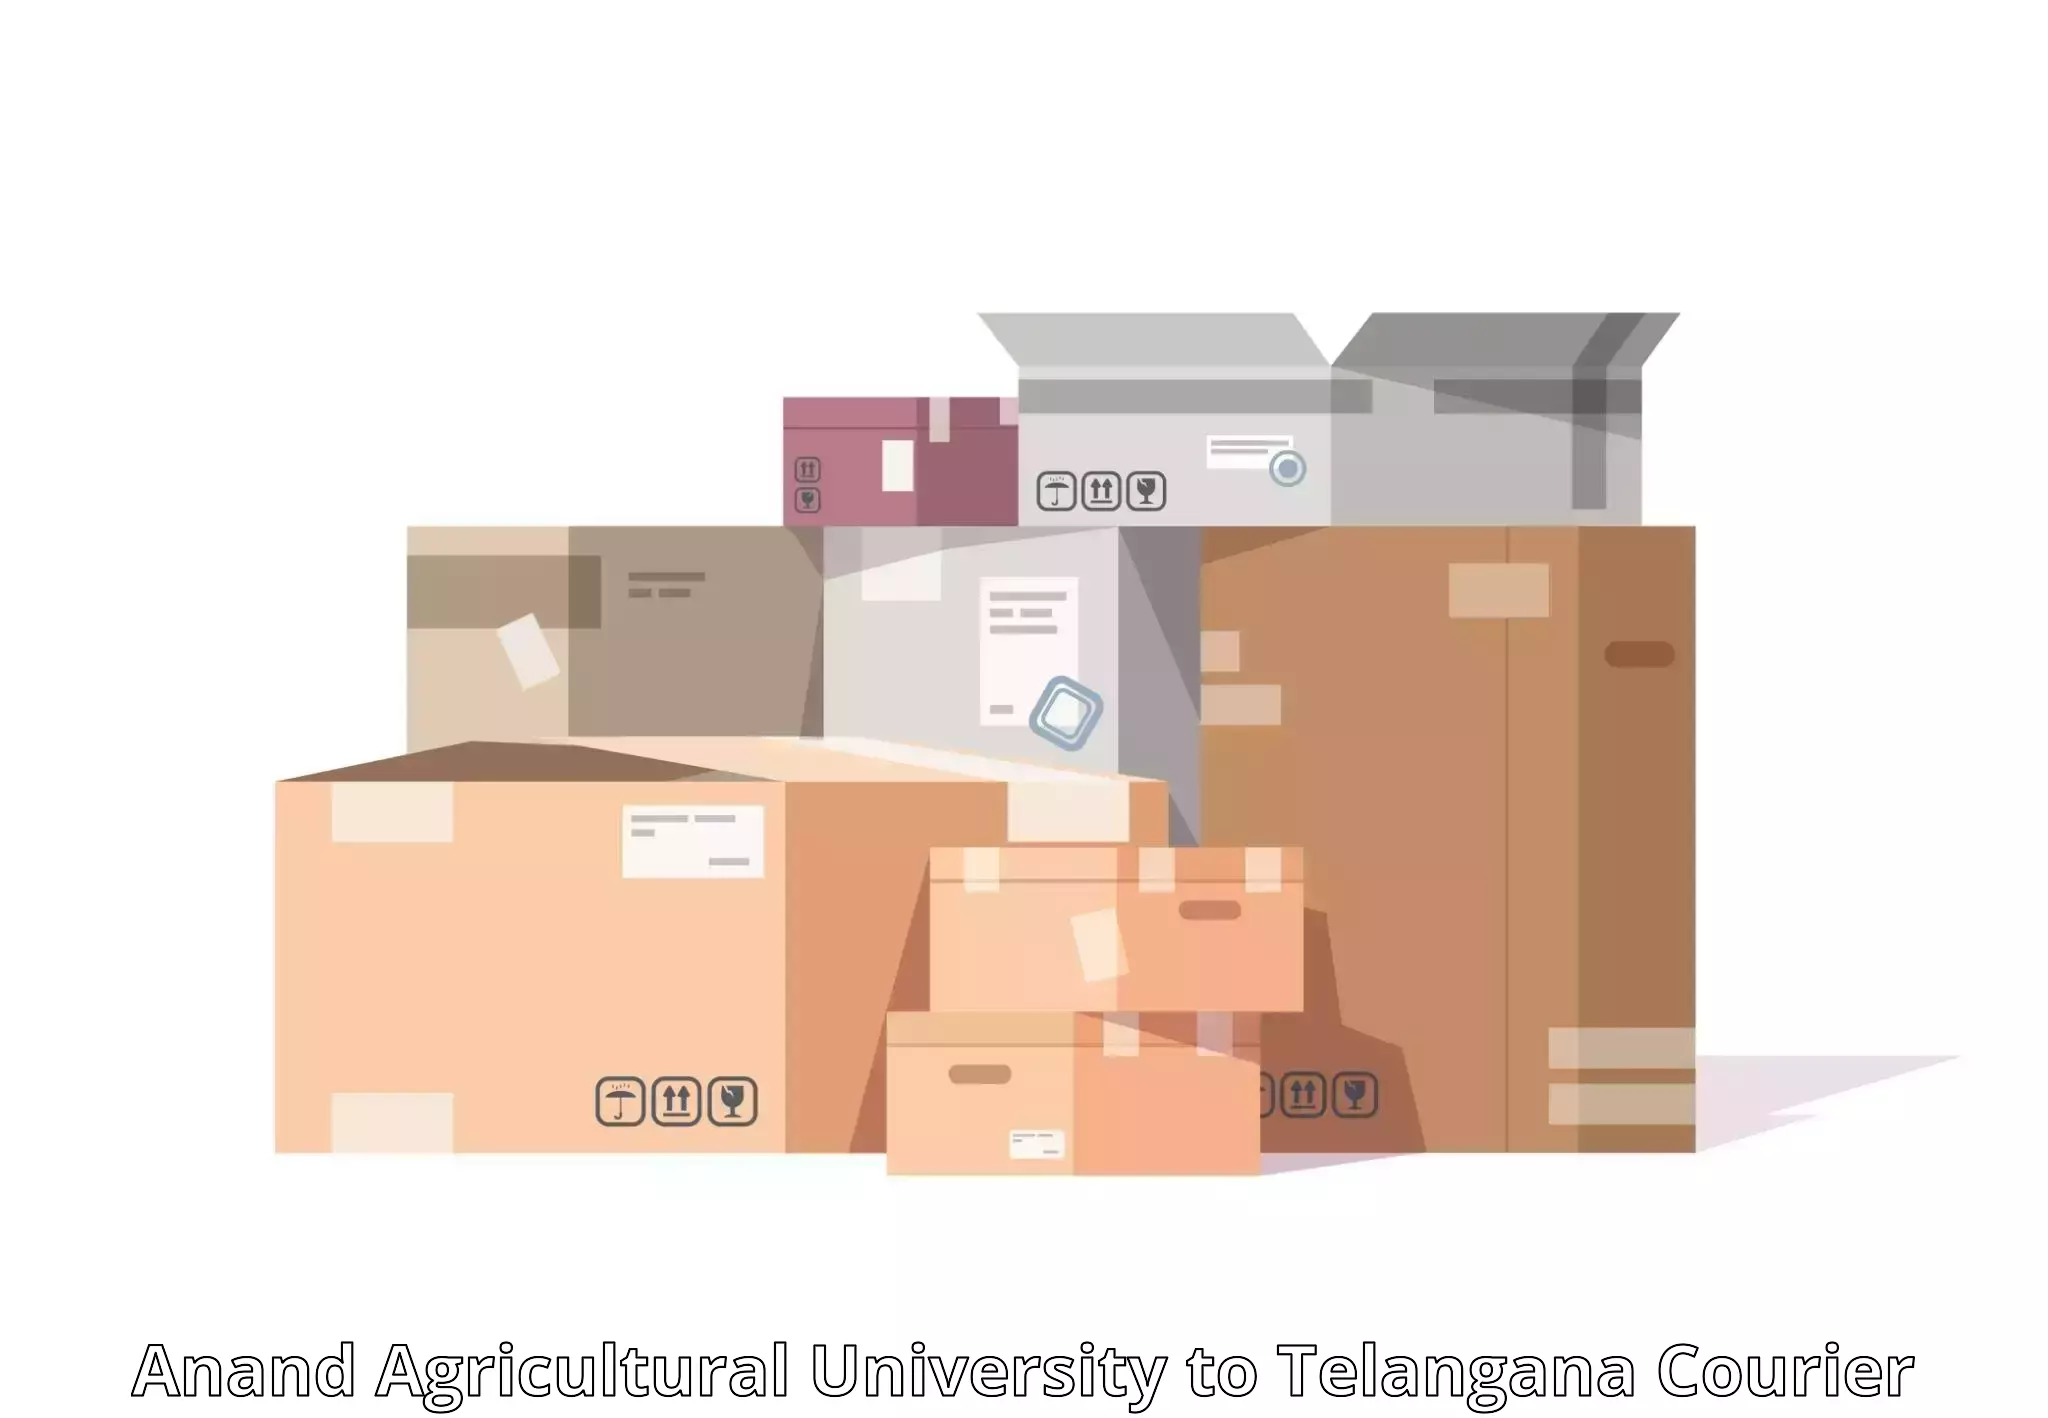 Online courier booking Anand Agricultural University to Nalgonda